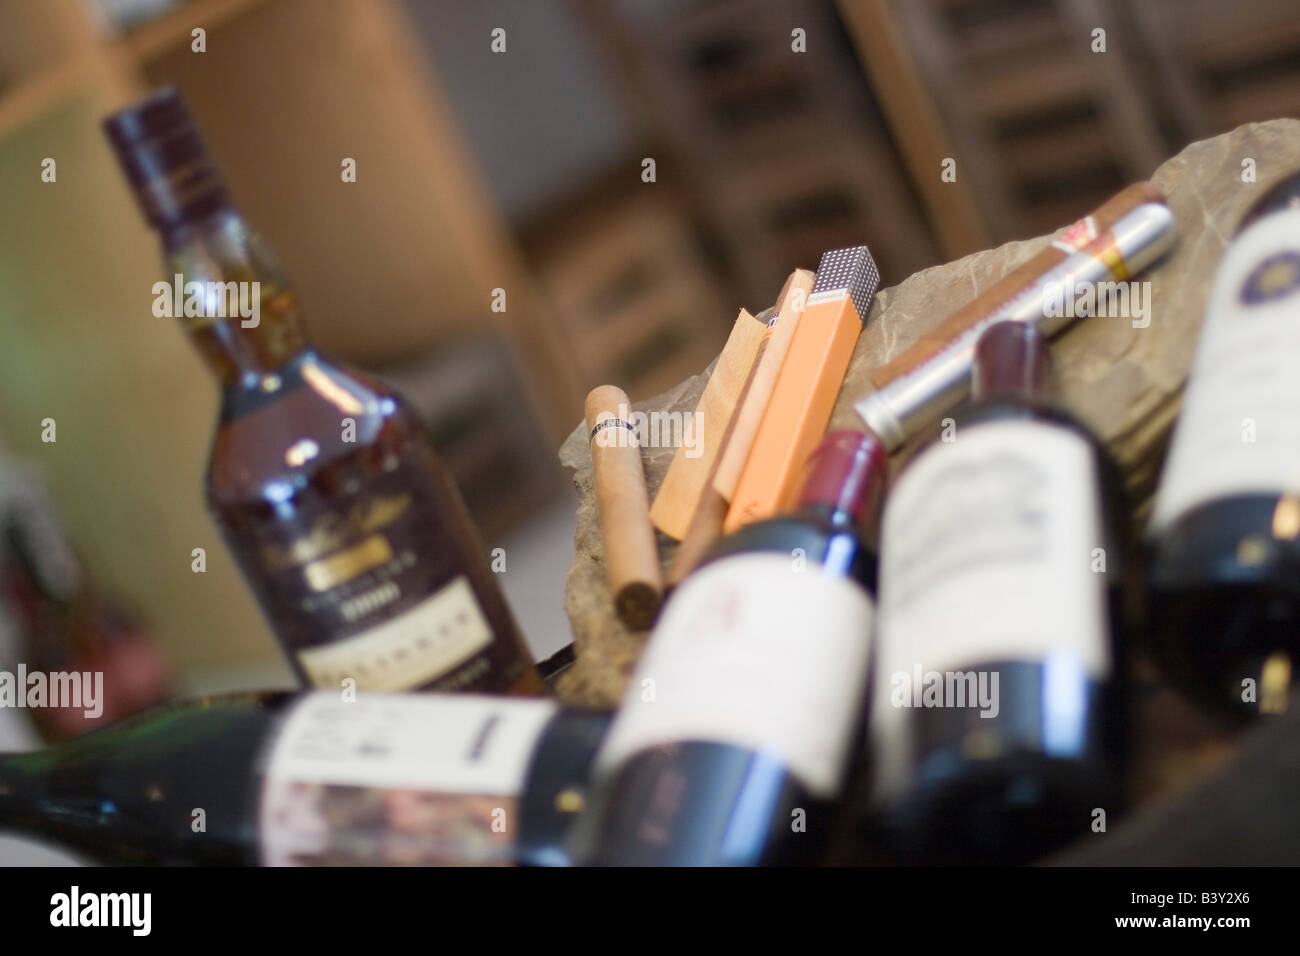 bottles of wine and whisky with cigars Stock Photo